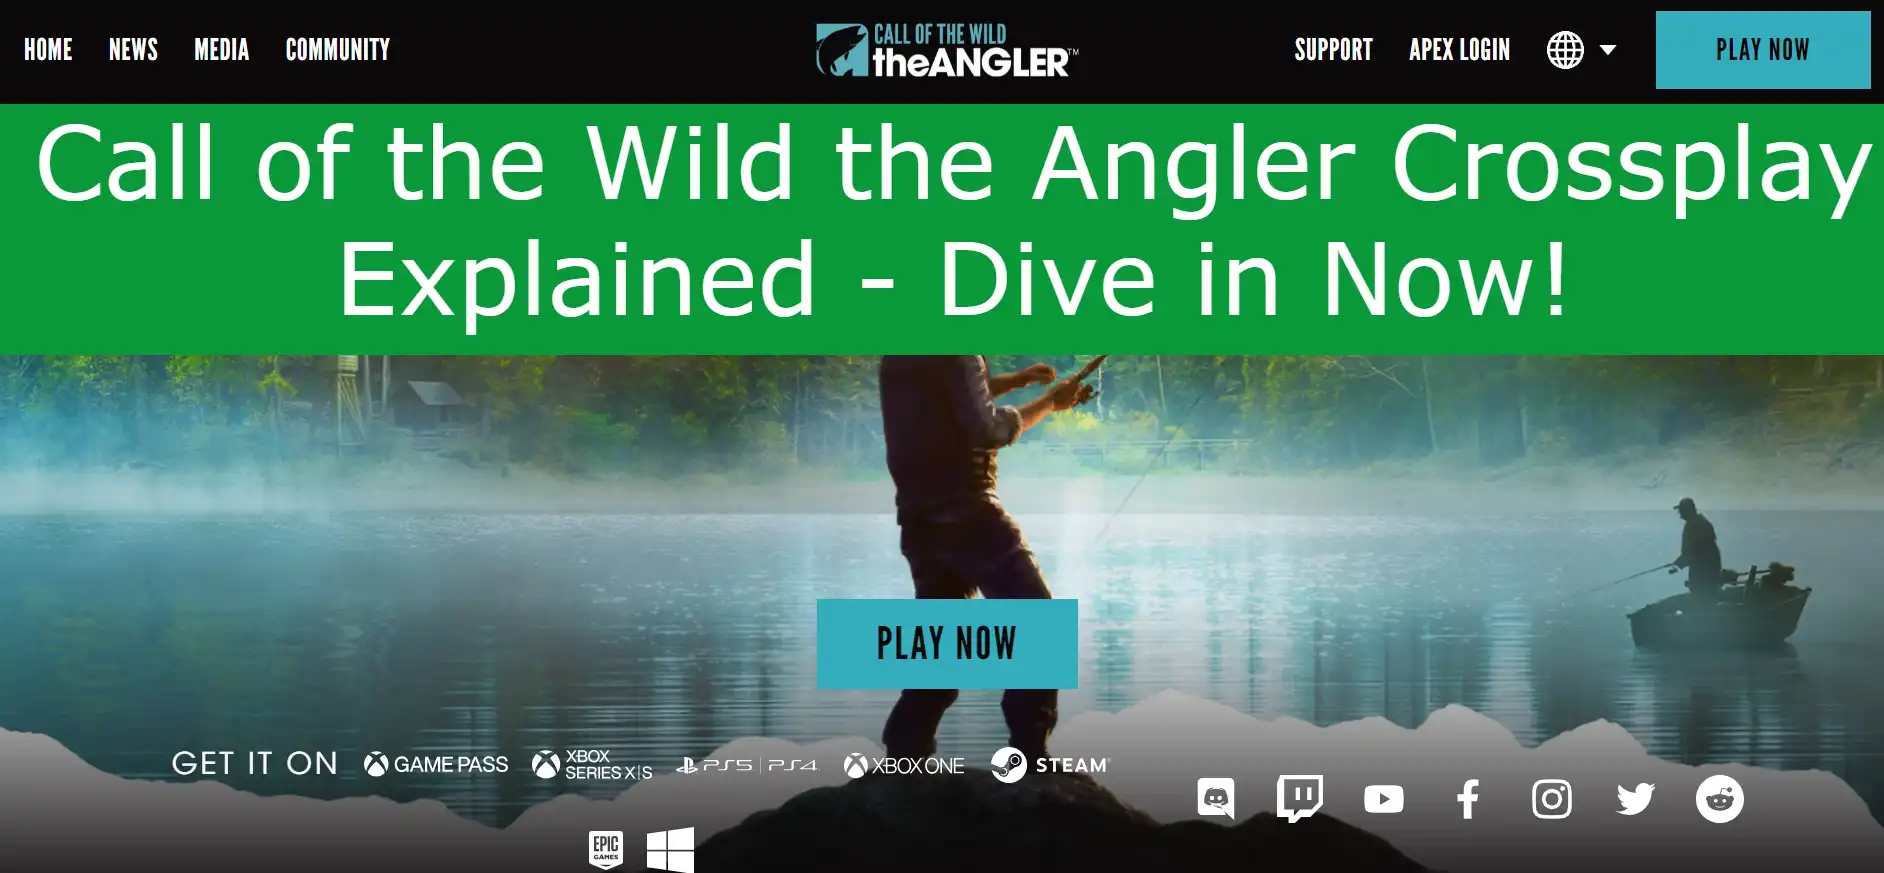 You are currently viewing Call of the Wild the Angler Crossplay Platform Explained